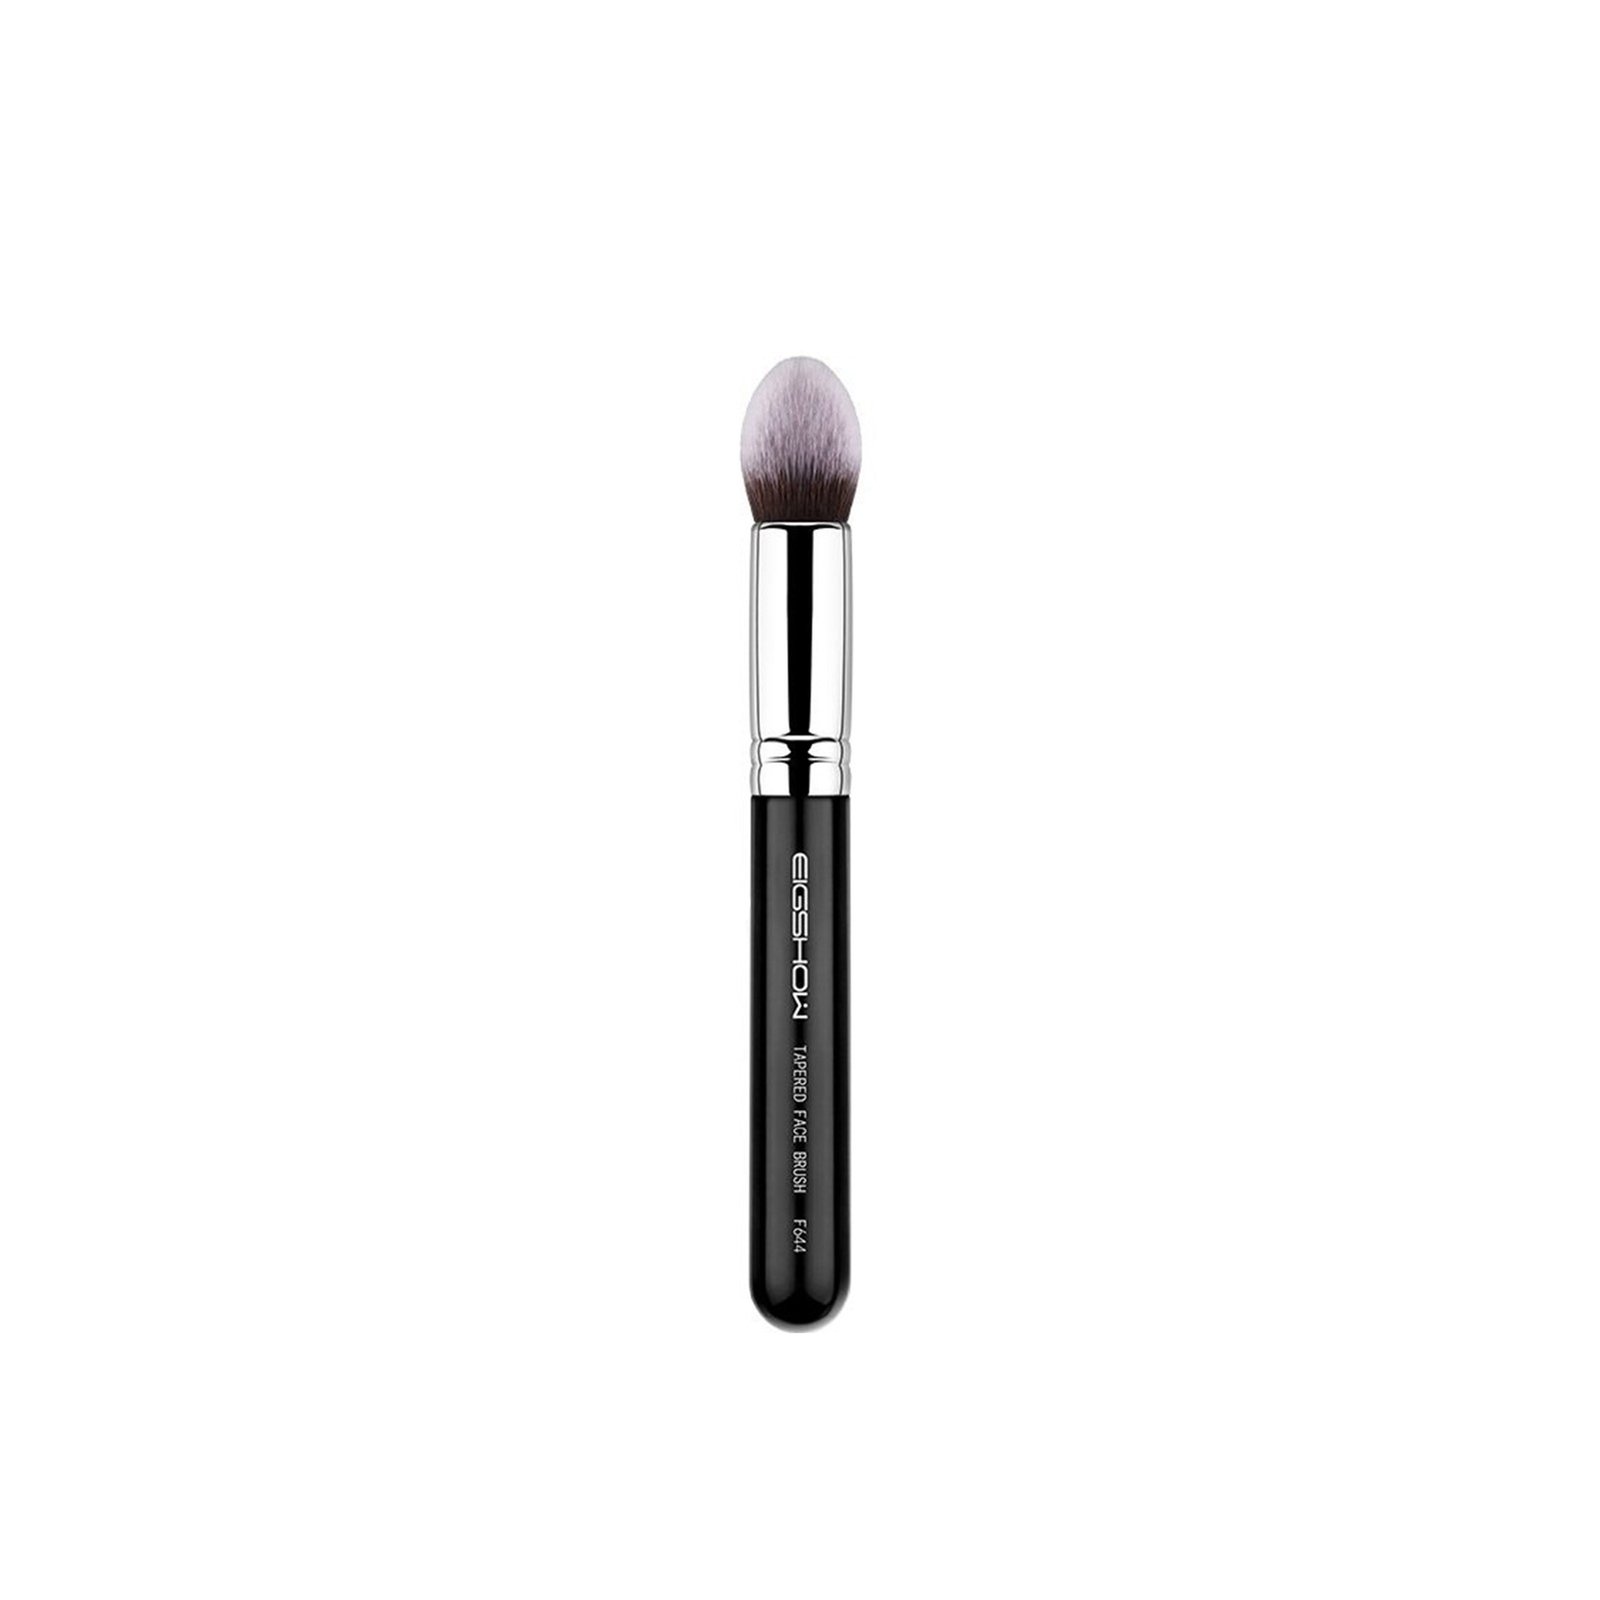 Eigshow Beauty Tapered Face Brush F644